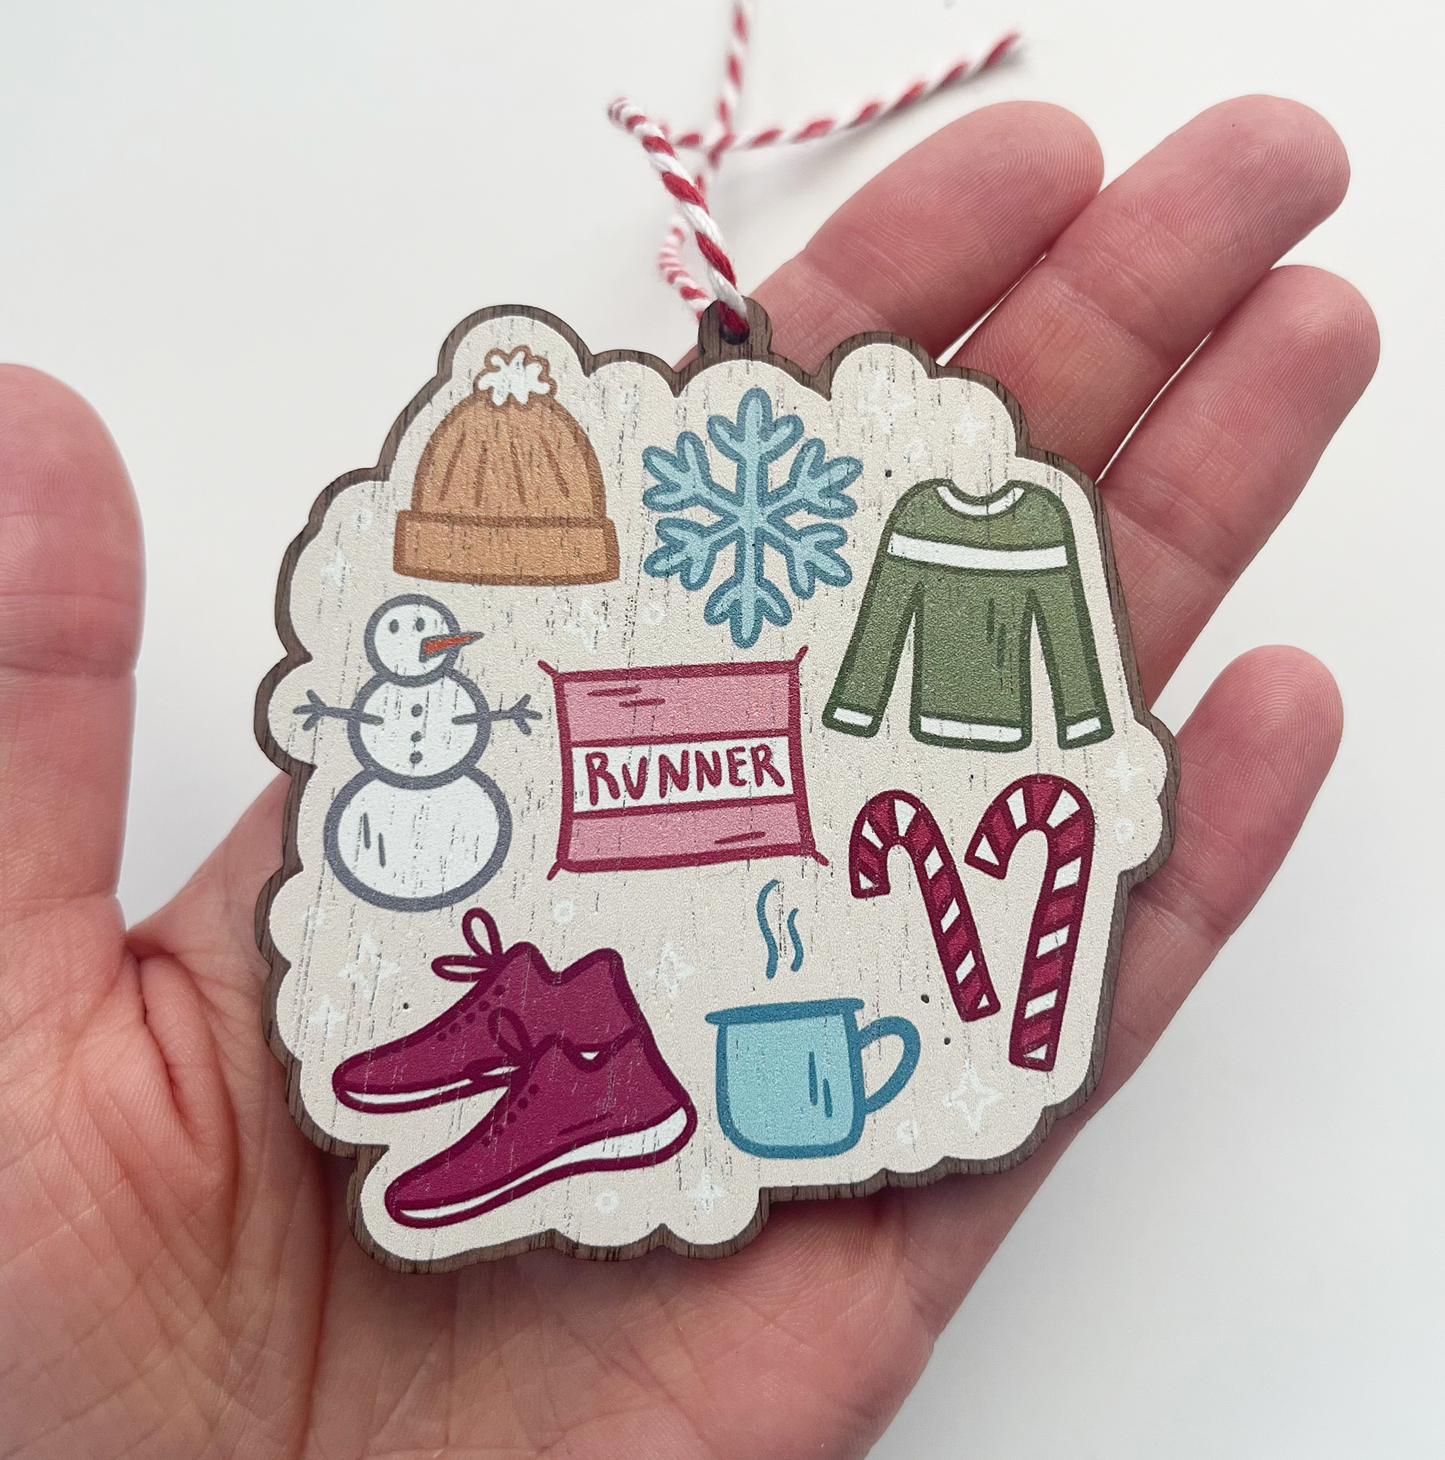 Winter running items like bib, shoes, coffee mug, candy canes, snowman, hat, sweater and snowflake on ornament